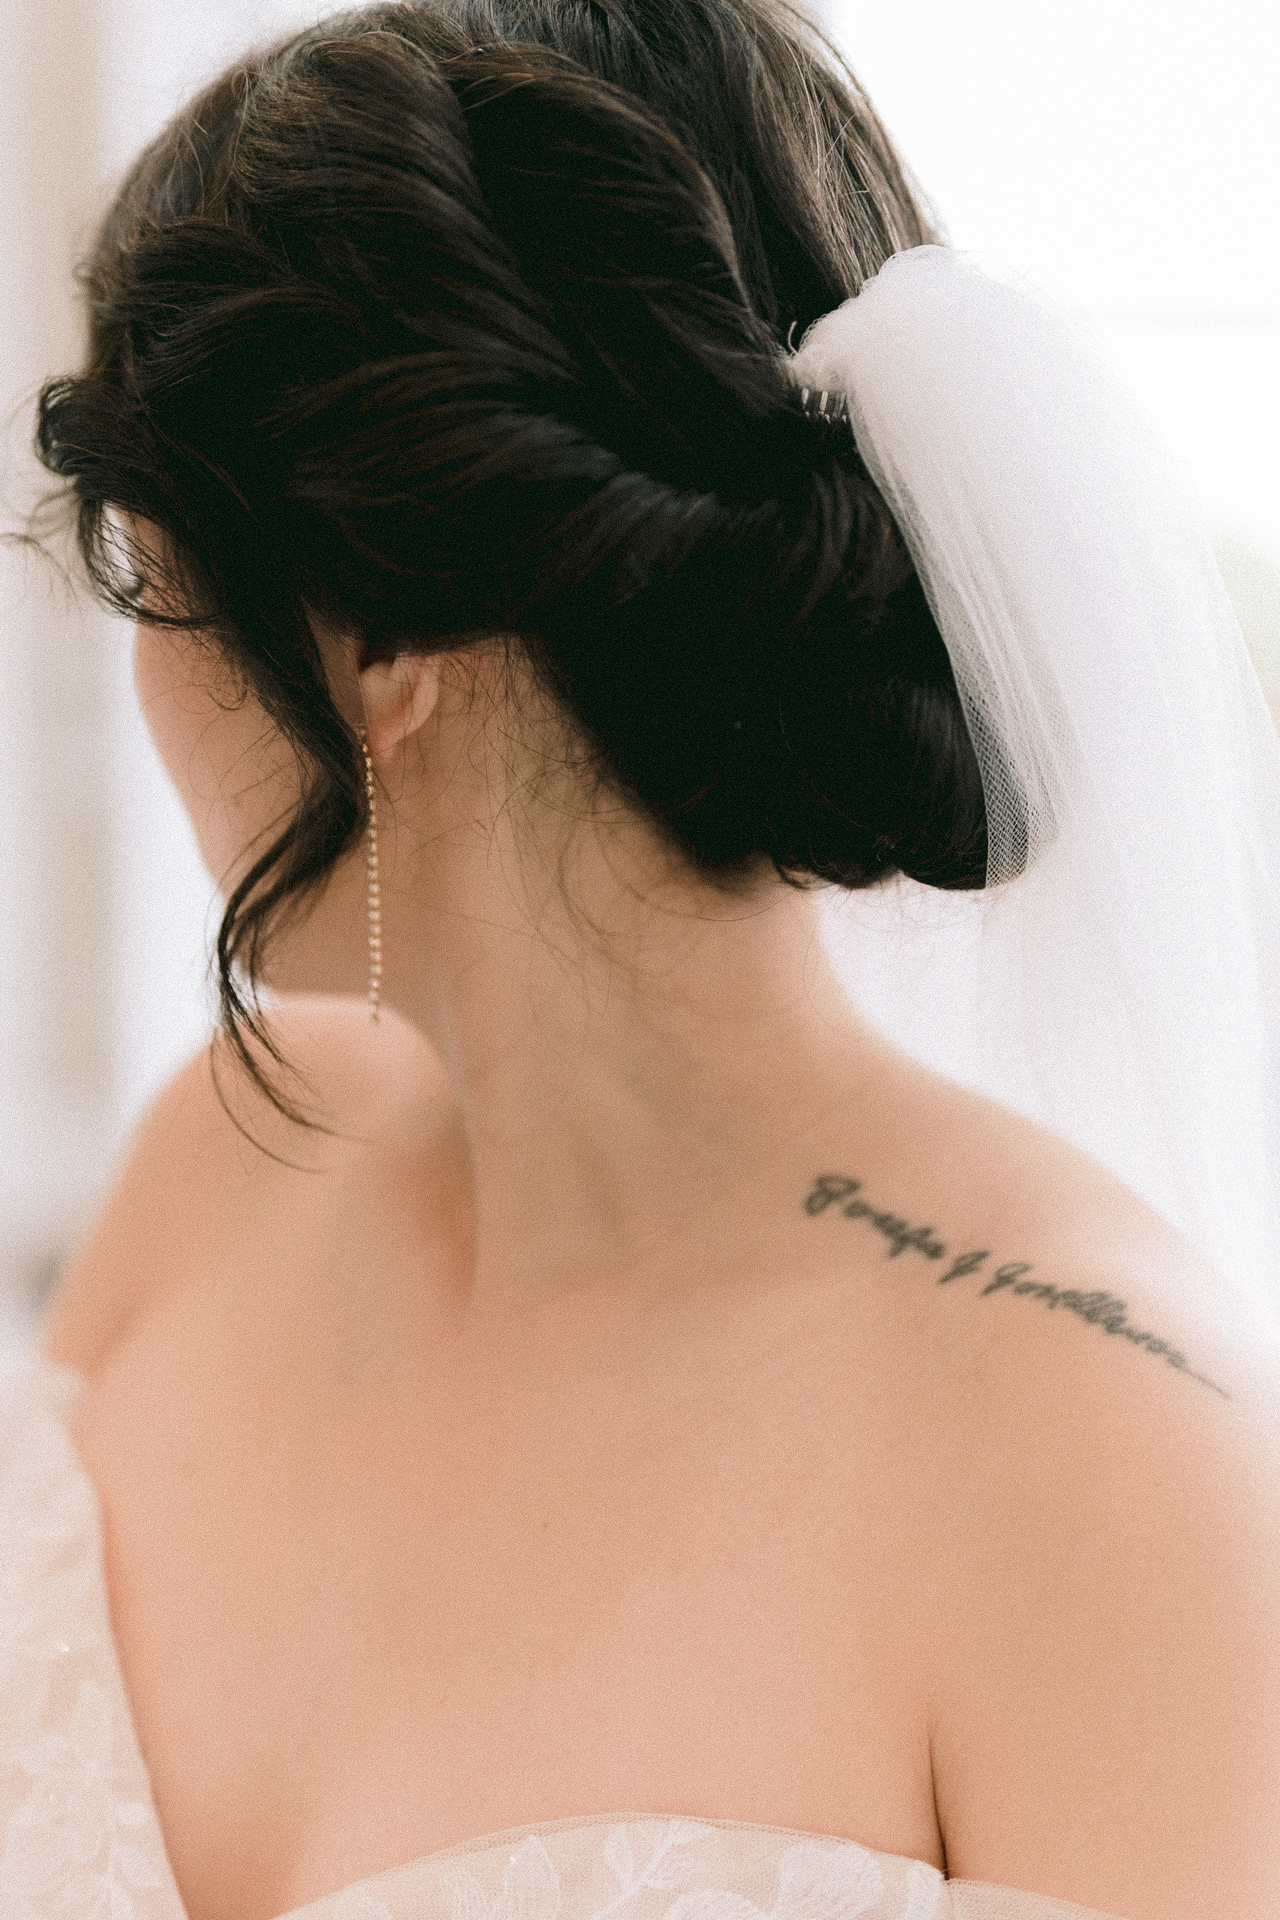 Bride with an elegant updo hairstyle and veil, showcasing a tattoo on her shoulder.